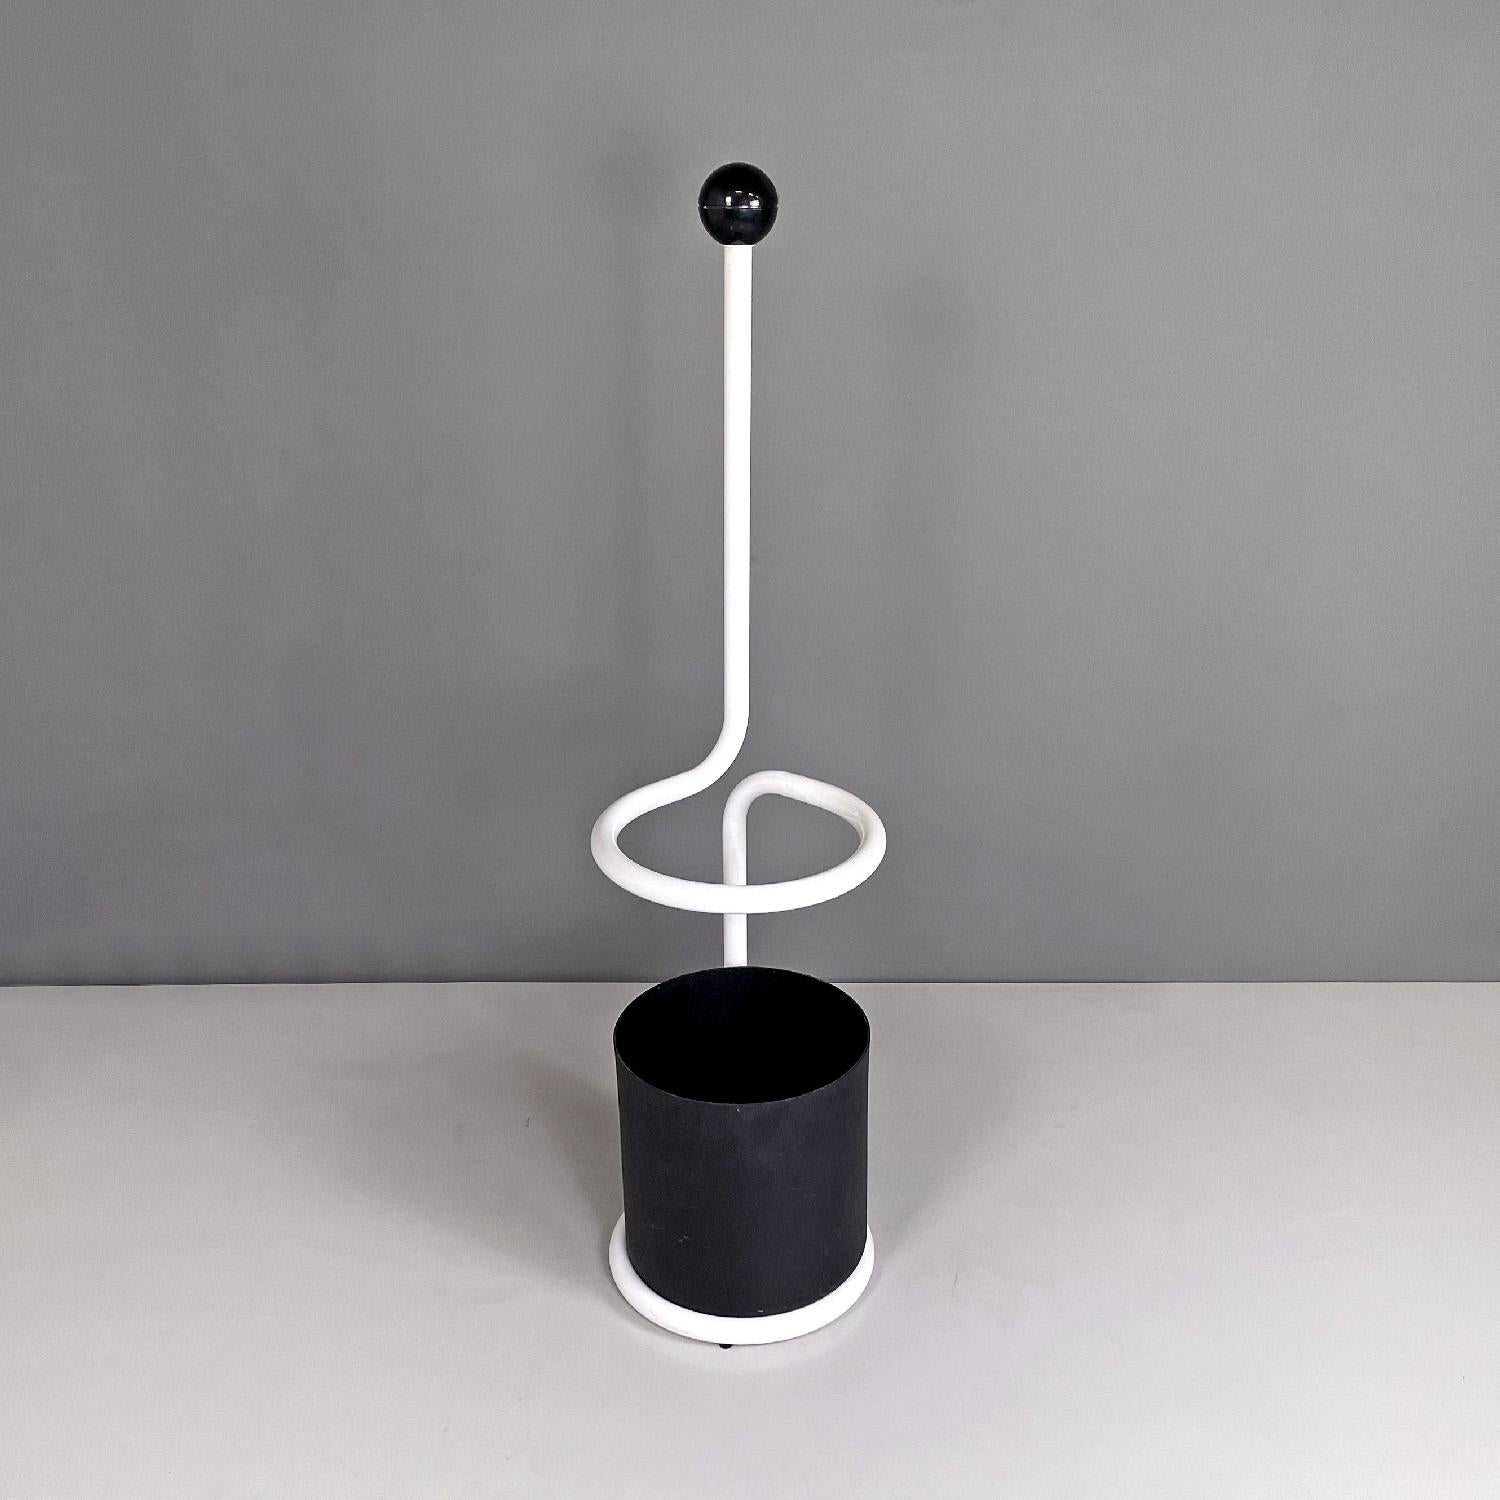 Italian modern metal umbrella holder by Forma e Funzione for Airon, 1980s
Round metal umbrella stand. The tubular structure in gray painted metal forms the base and the lateral stem, where inside there is a cylinder in black painted metal where